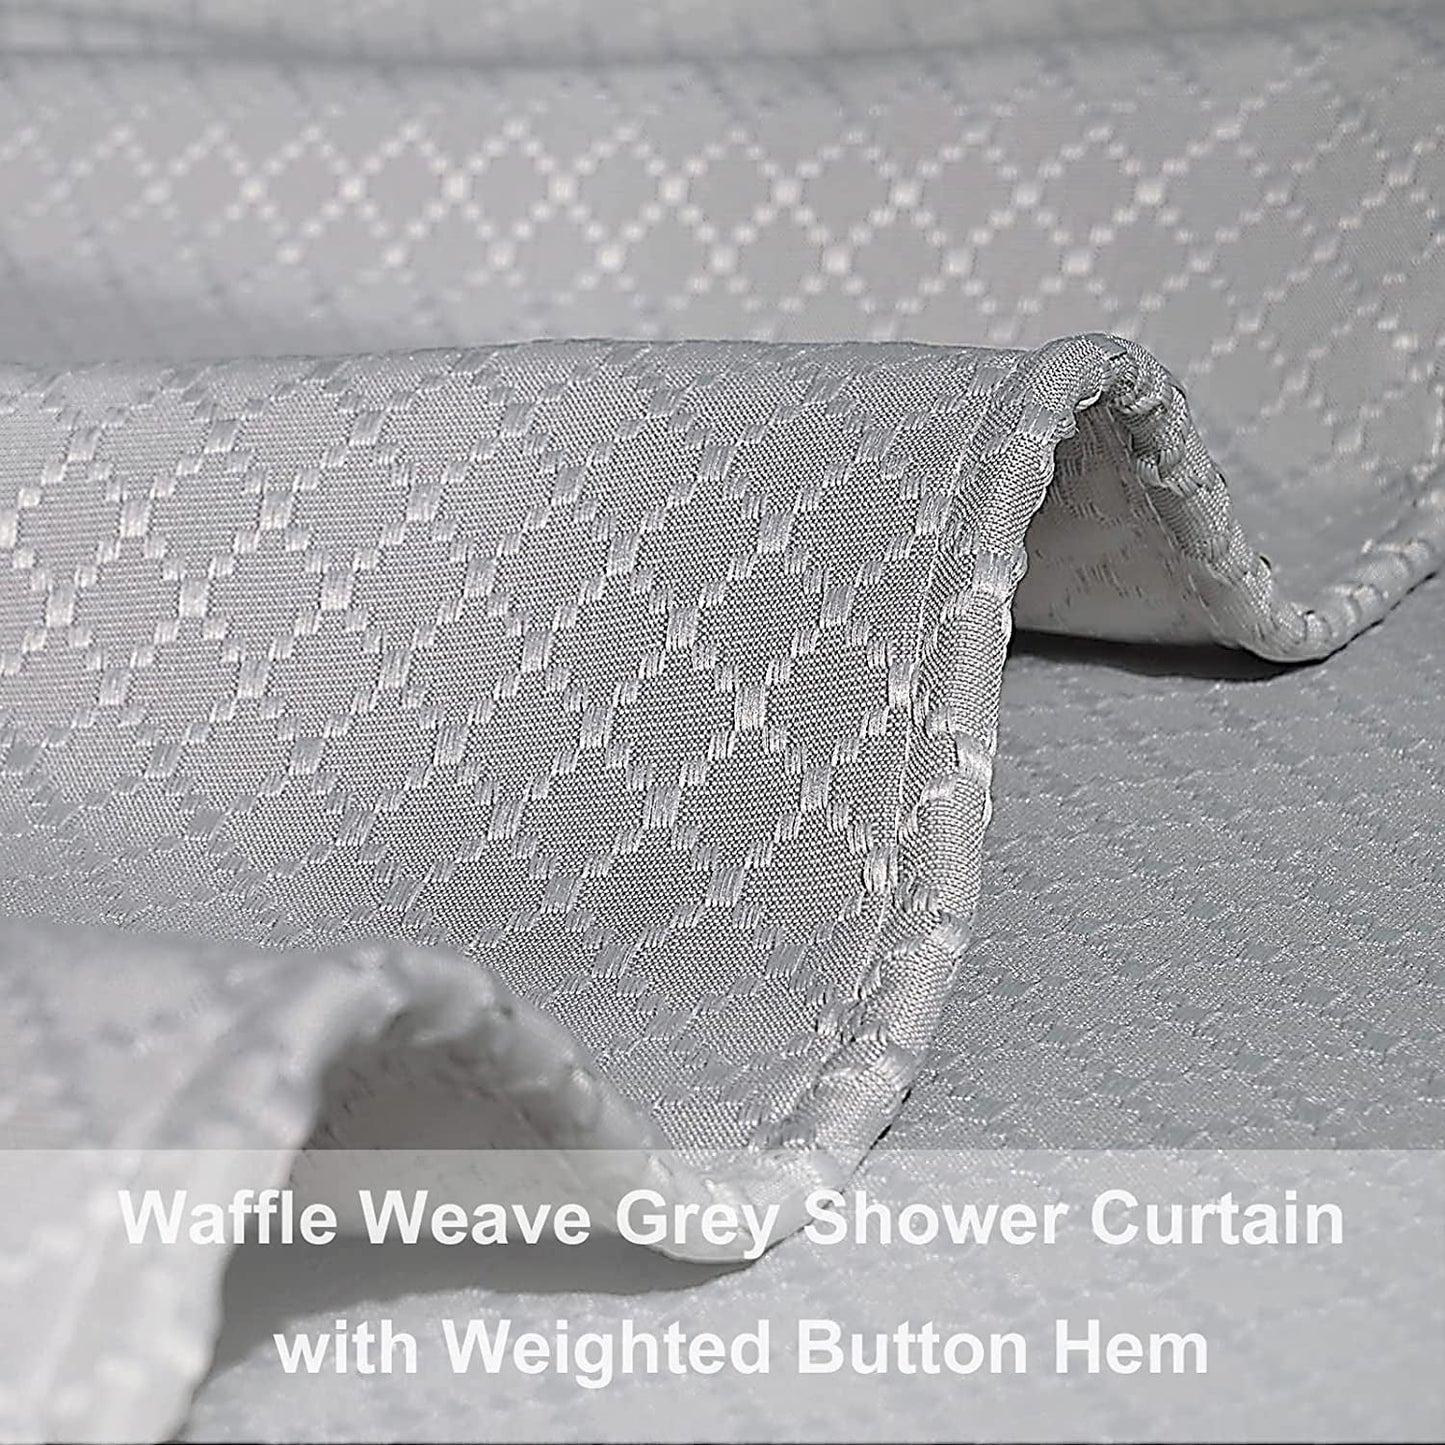 Grey Shower Curtain - Waffle Weave Cloth Shower Curtain for Bathroom, Hotel Luxury Bathroom Curtains Set with 12 Plastic Hooks, Machine Washable, Water-Repellent, Standard Size 72Wx72H